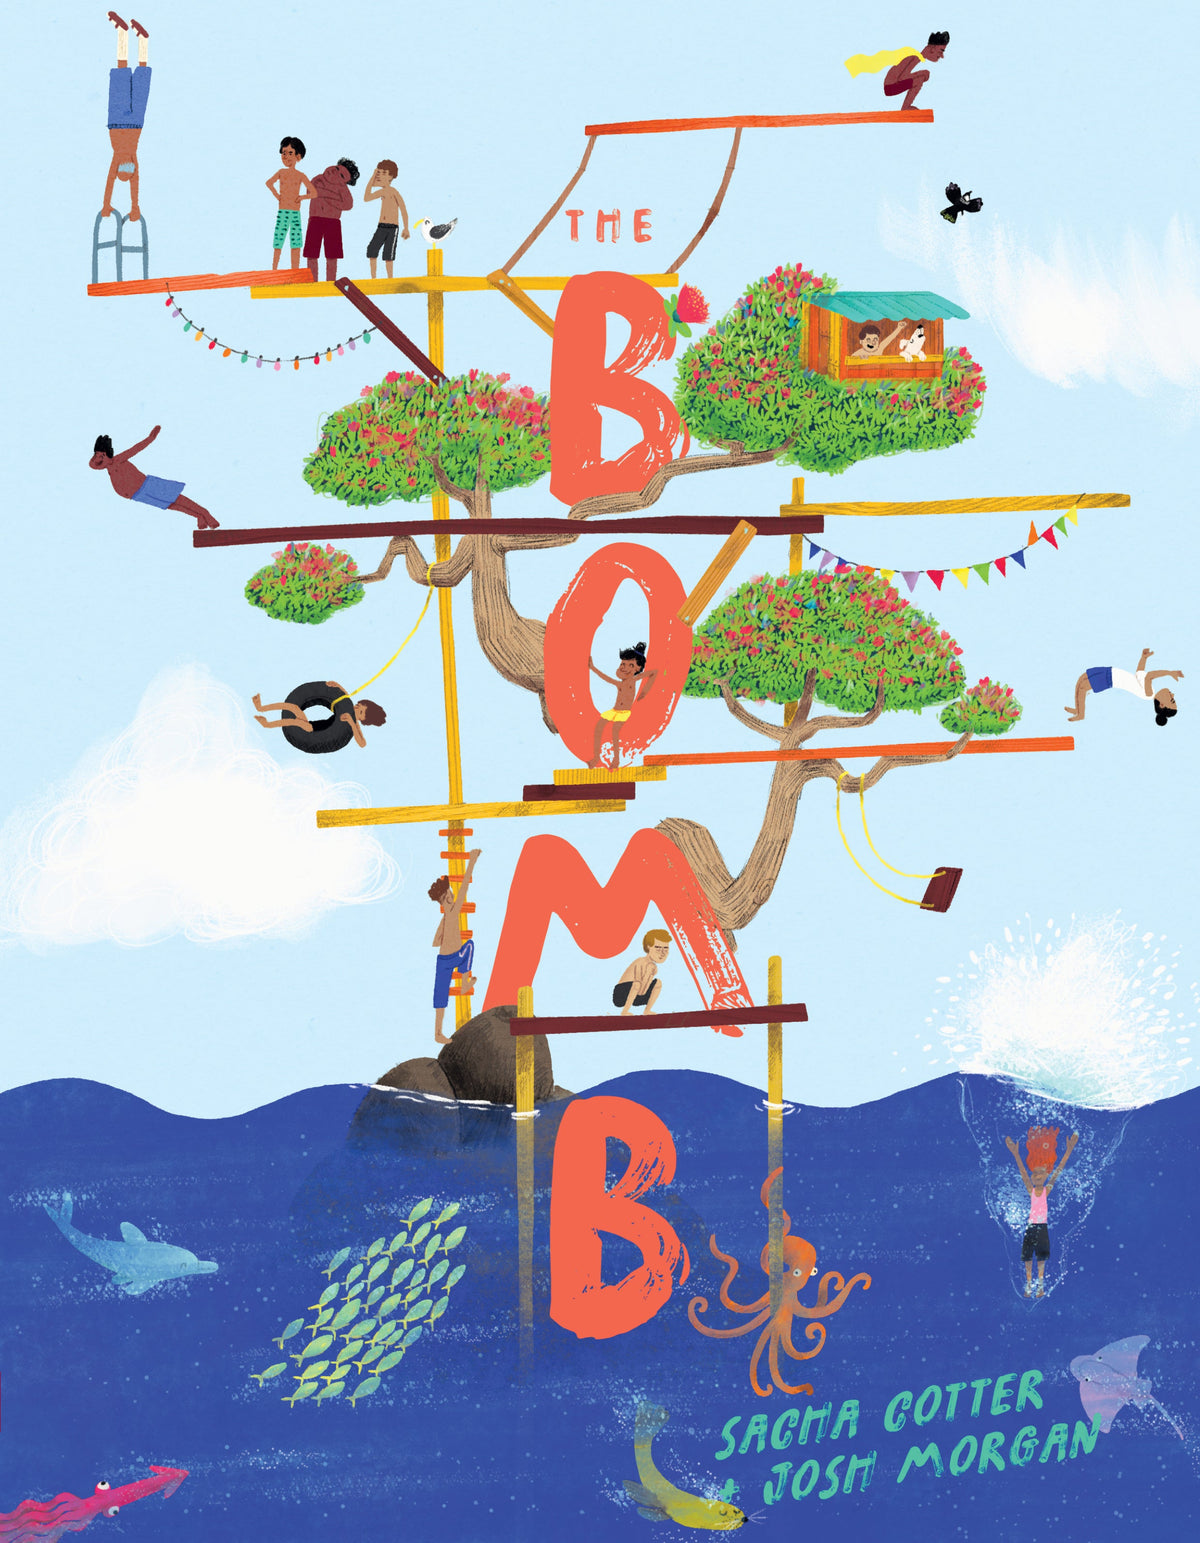 The Bomb by Sacha Cotter and Josh Morgan